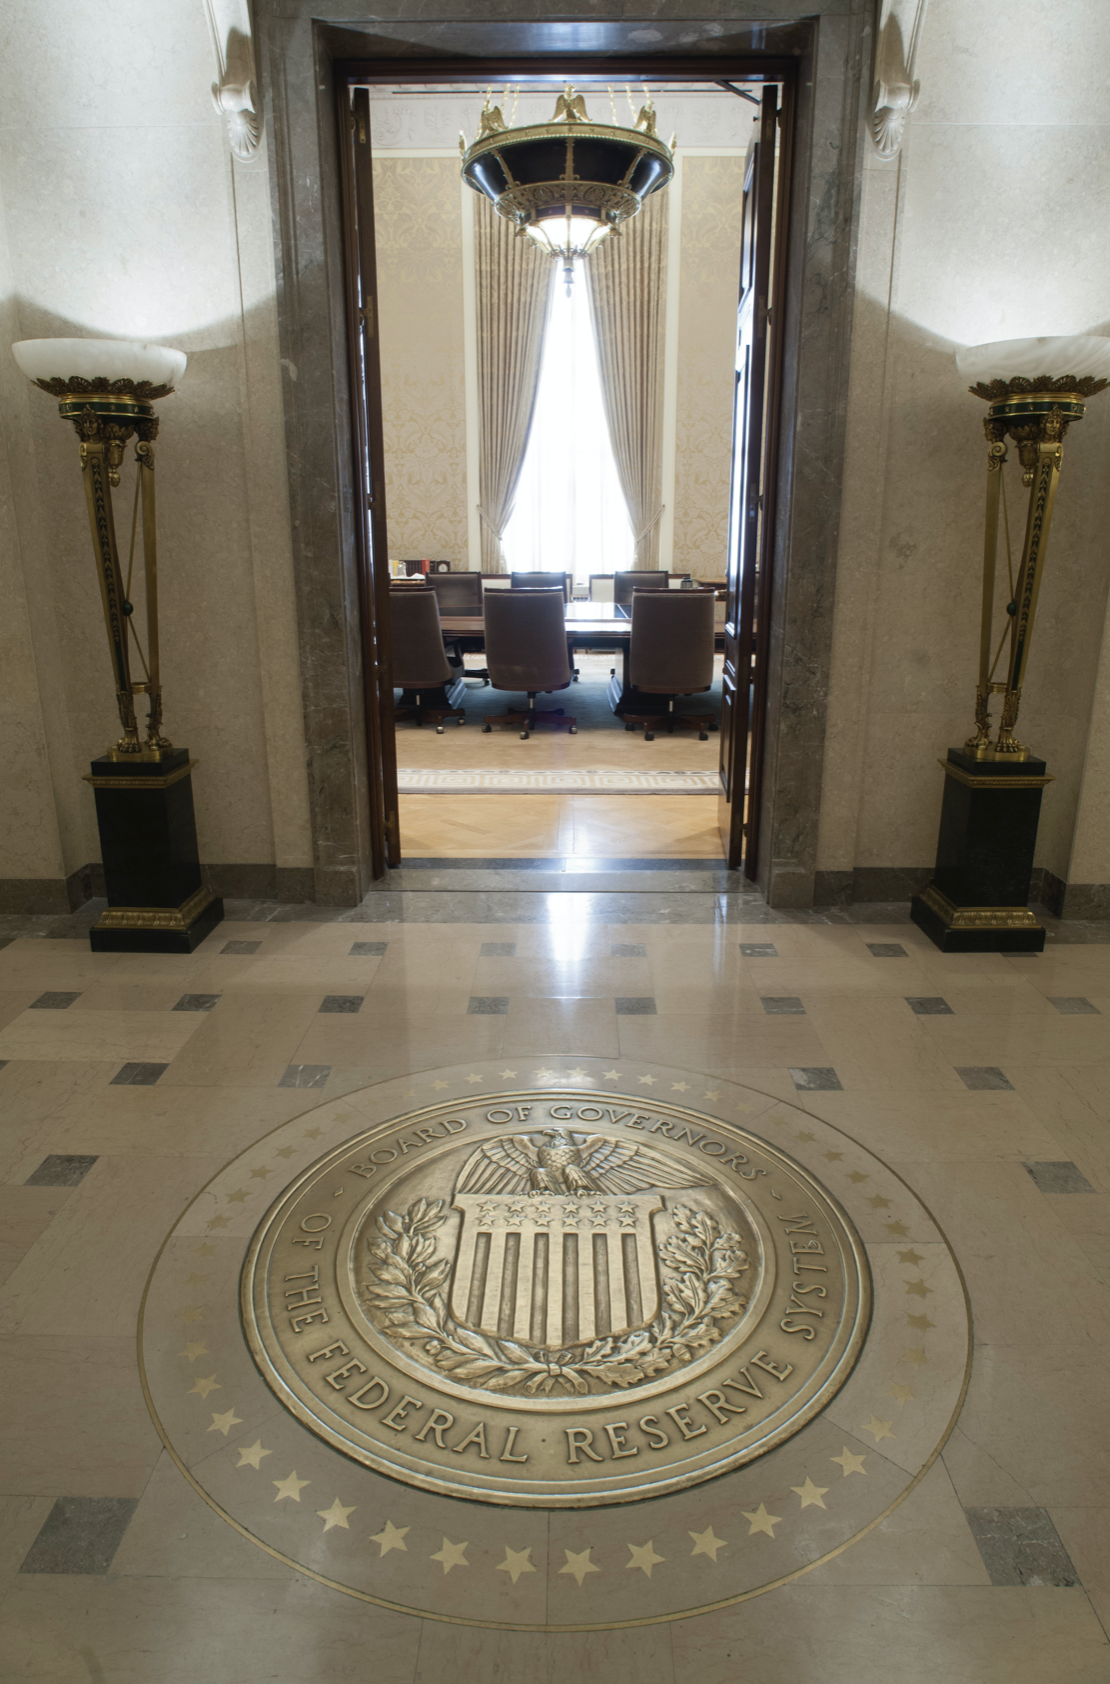 photo of Fed Seal on floor of Marriner Eccles Building Washington DC